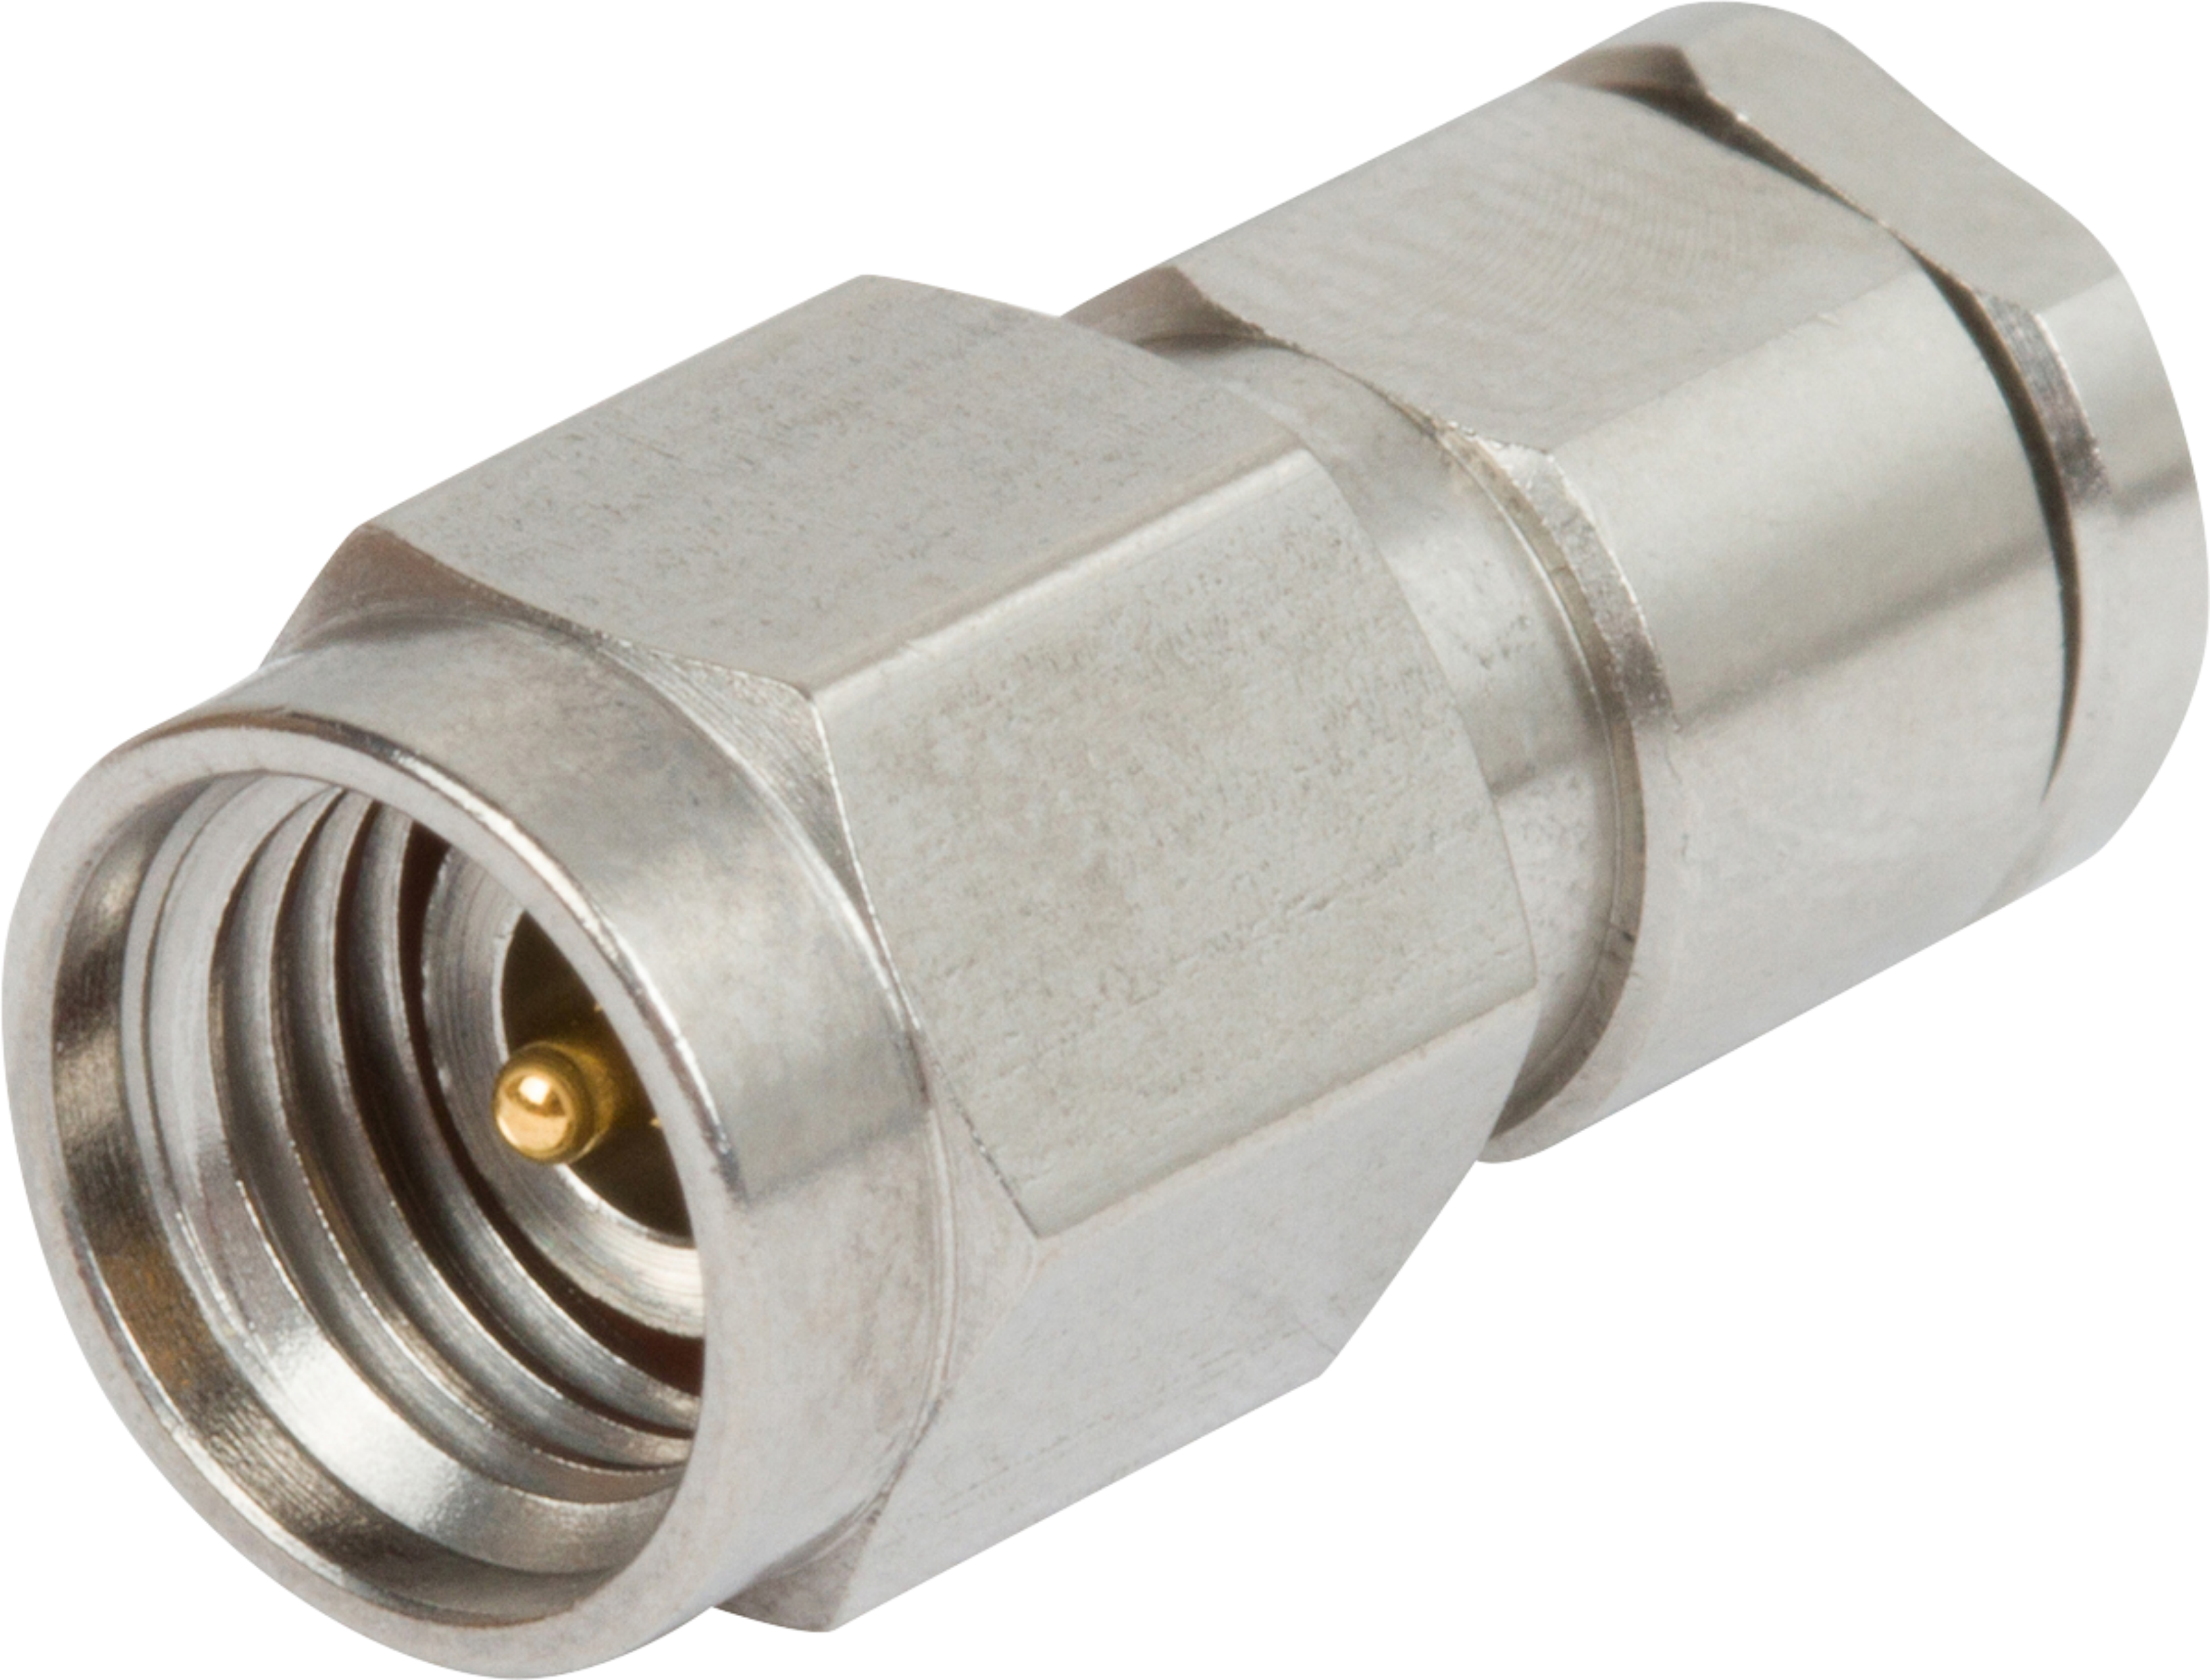 2.92mm Male Connector for .085 Cable, SF1511-60071